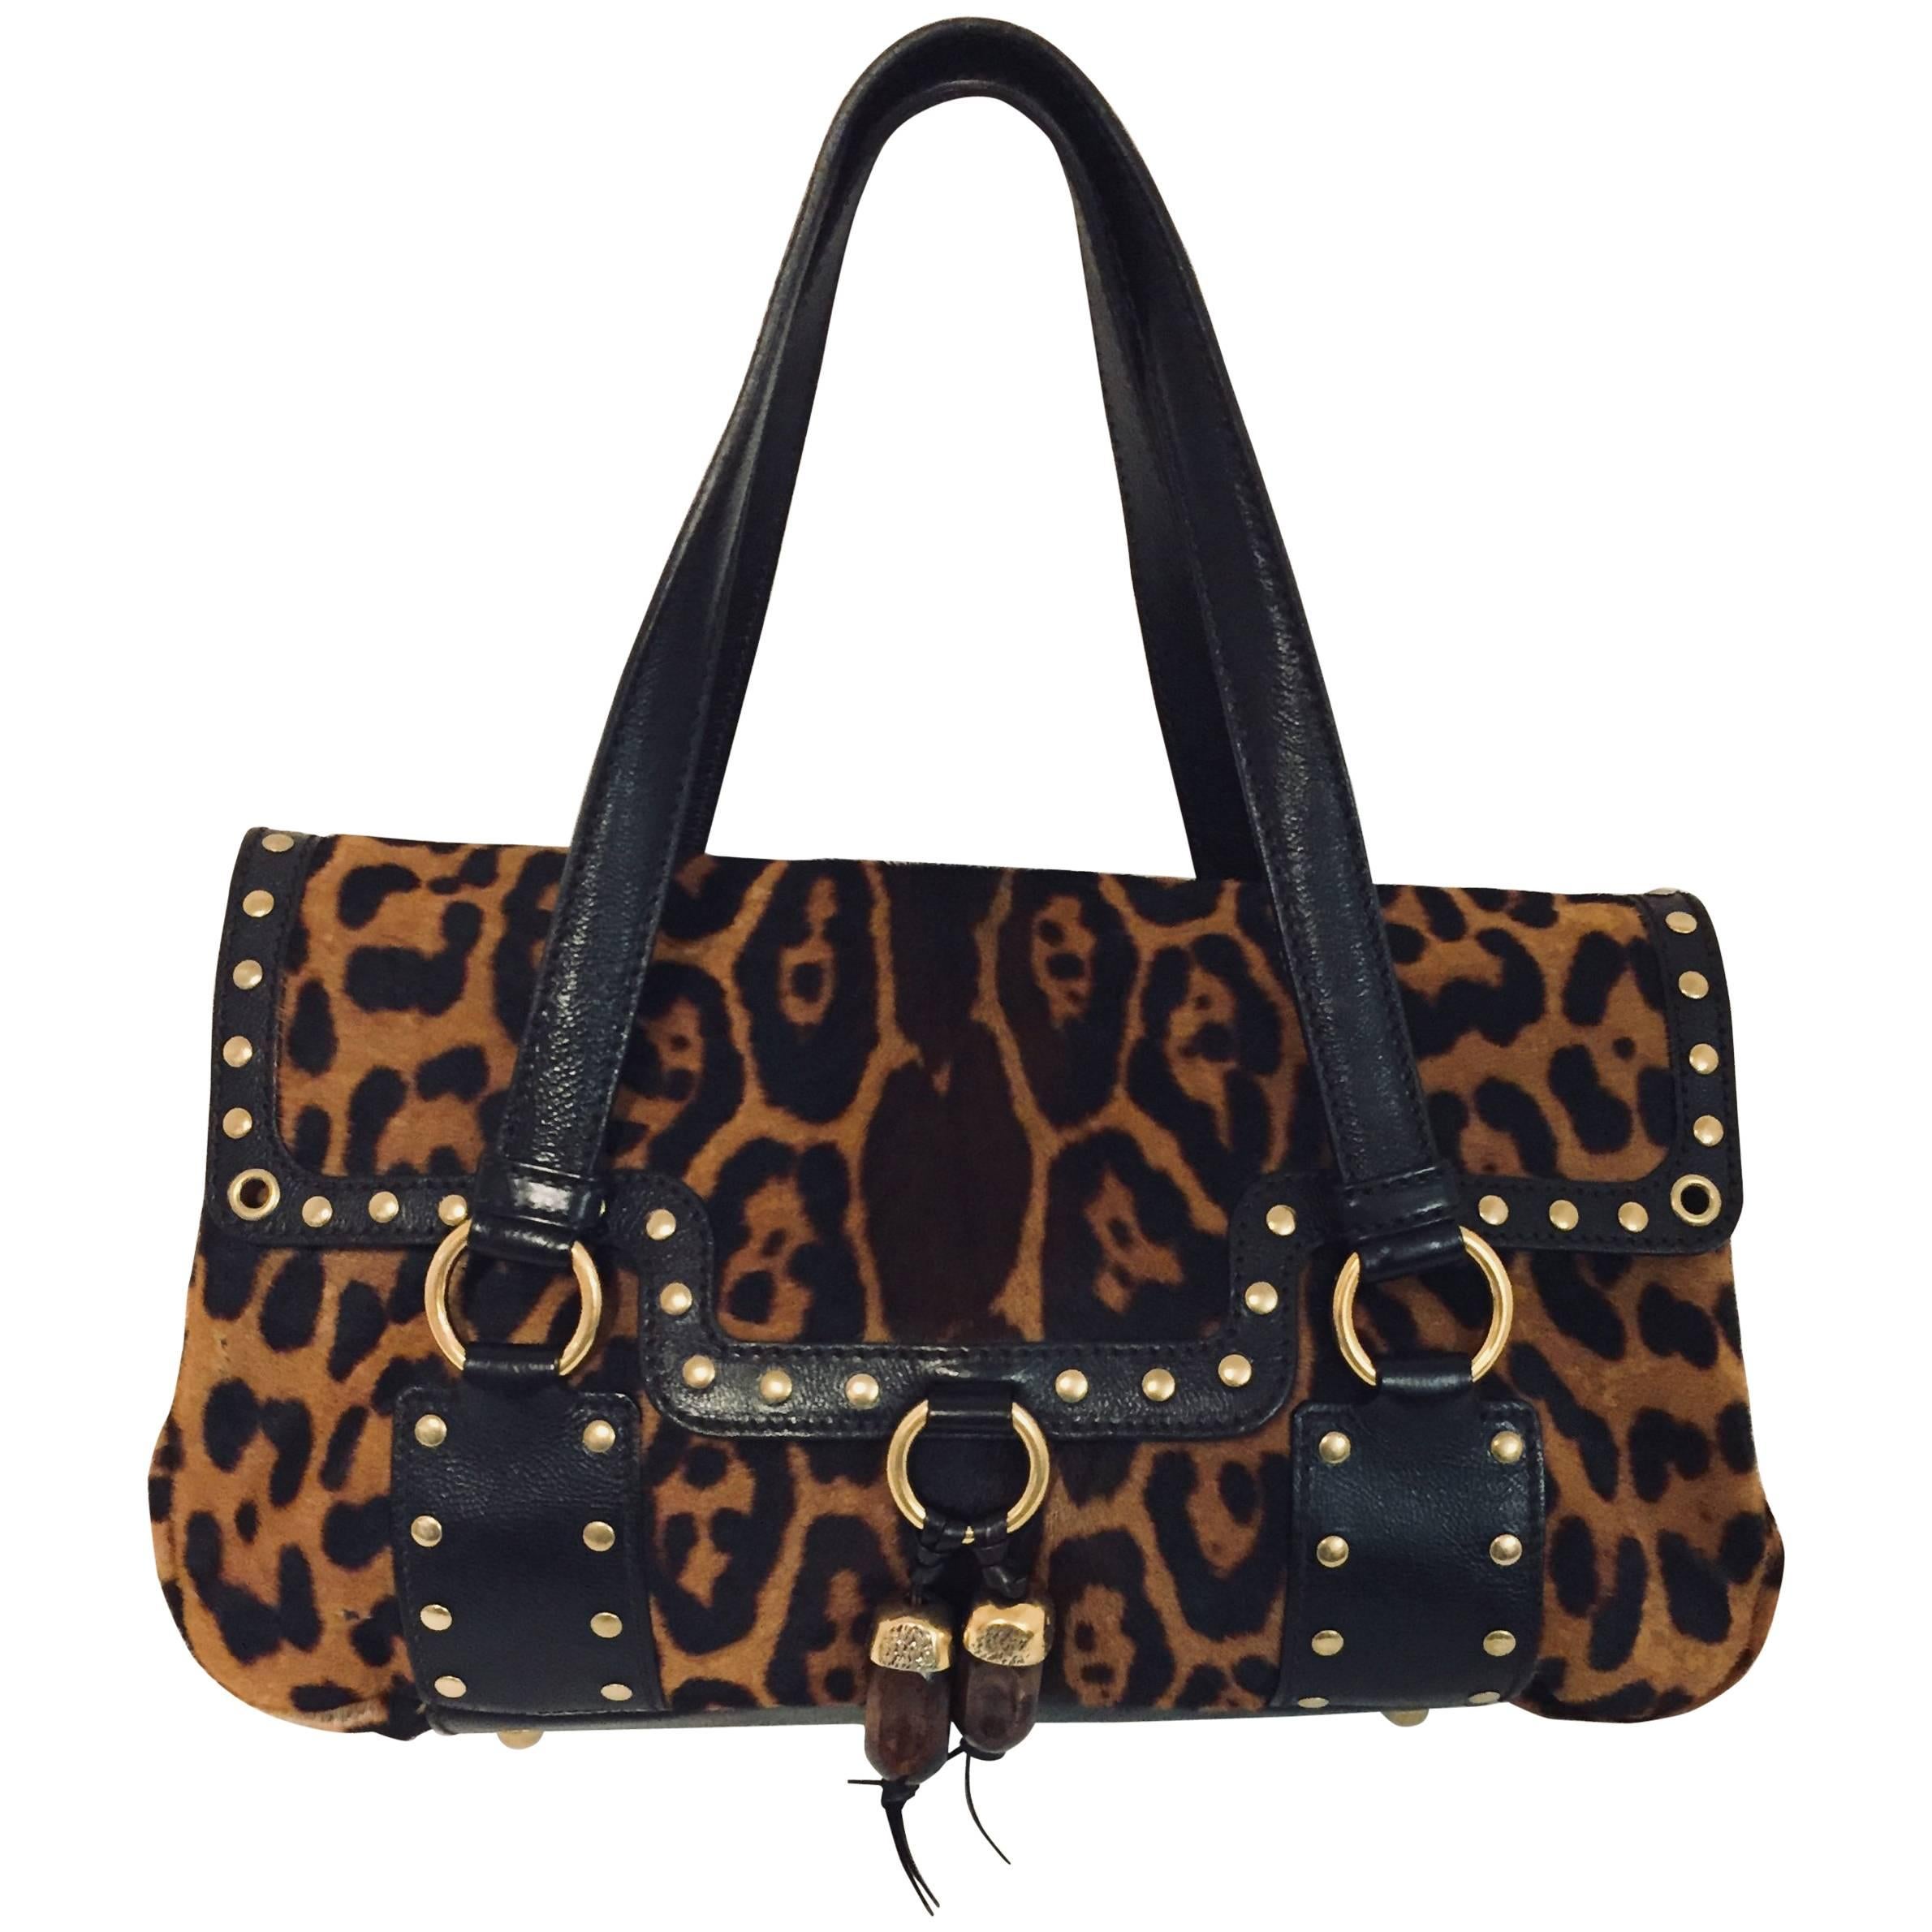 Yves Saint Laurent Leopard Print Pony Hair Leather Tote with Two Handles  For Sale